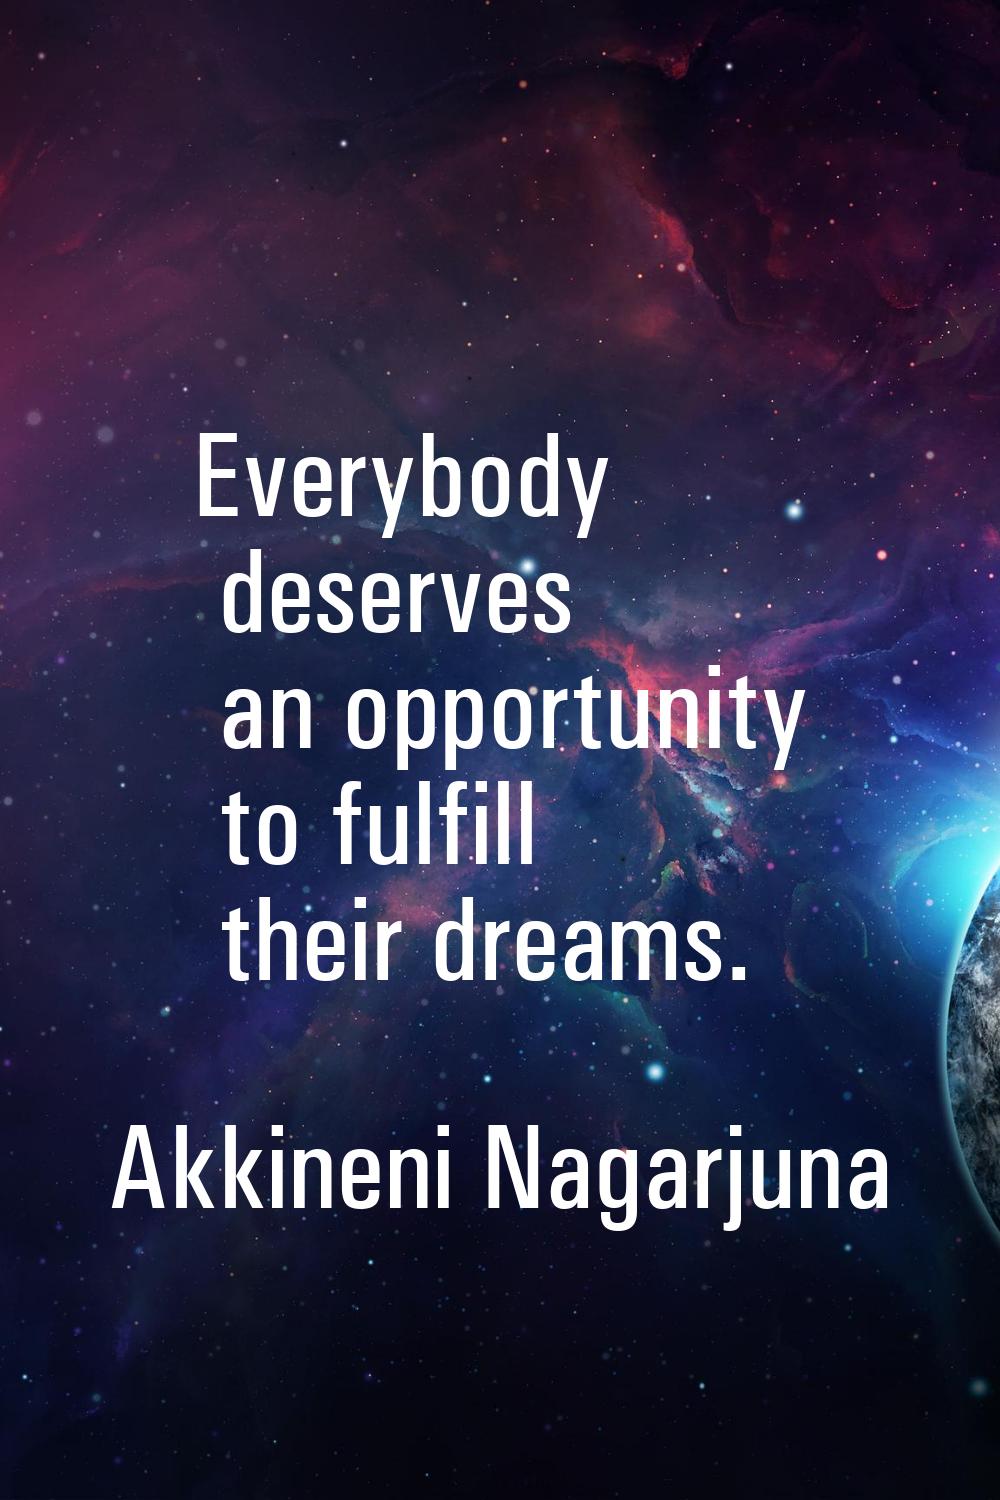 Everybody deserves an opportunity to fulfill their dreams.